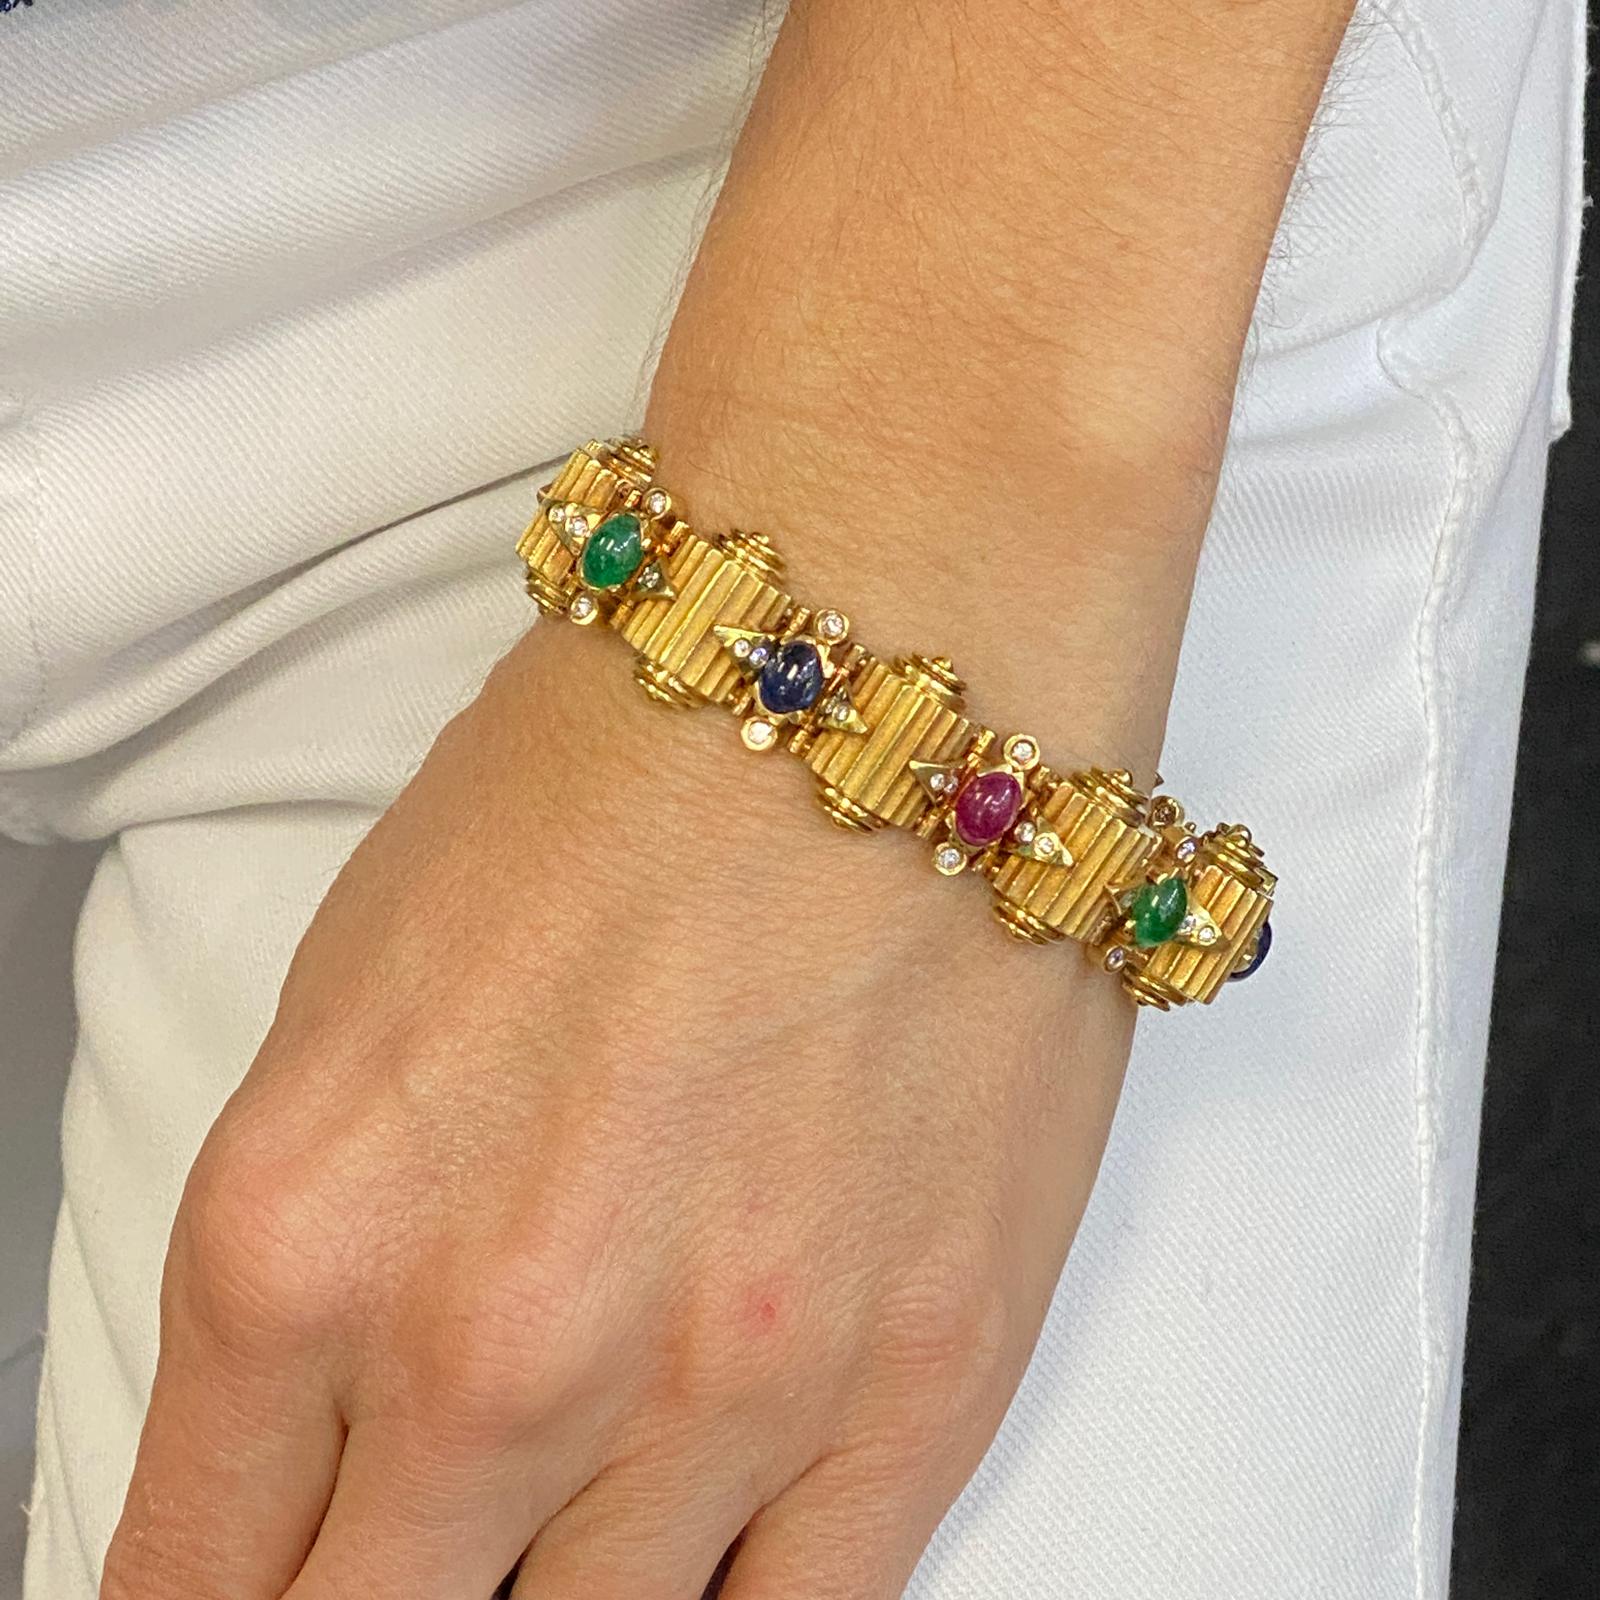 Fabulous diamond, emerald, ruby, and sapphire ribbed bracelet fashioned in solid 14 karat yellow gold. The bracelet features 60 round brilliant cut diamonds weighing approximately 1.00 CTW and graded G-H color and VS clarity. Another 10.00 carats of